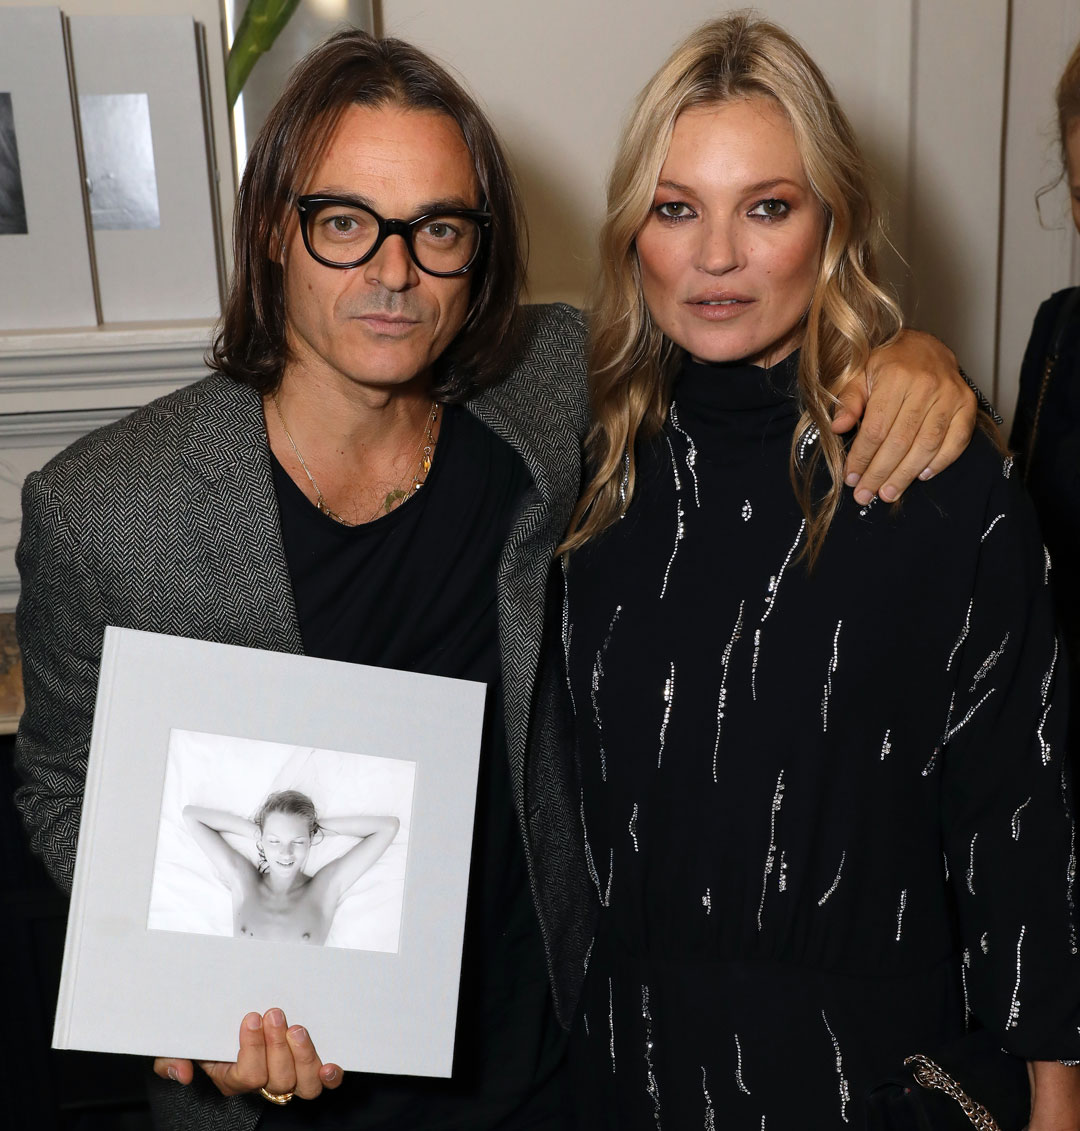 Photographer Mario Sorrenti and Kate Moss at Matches, 5 Carlos Place